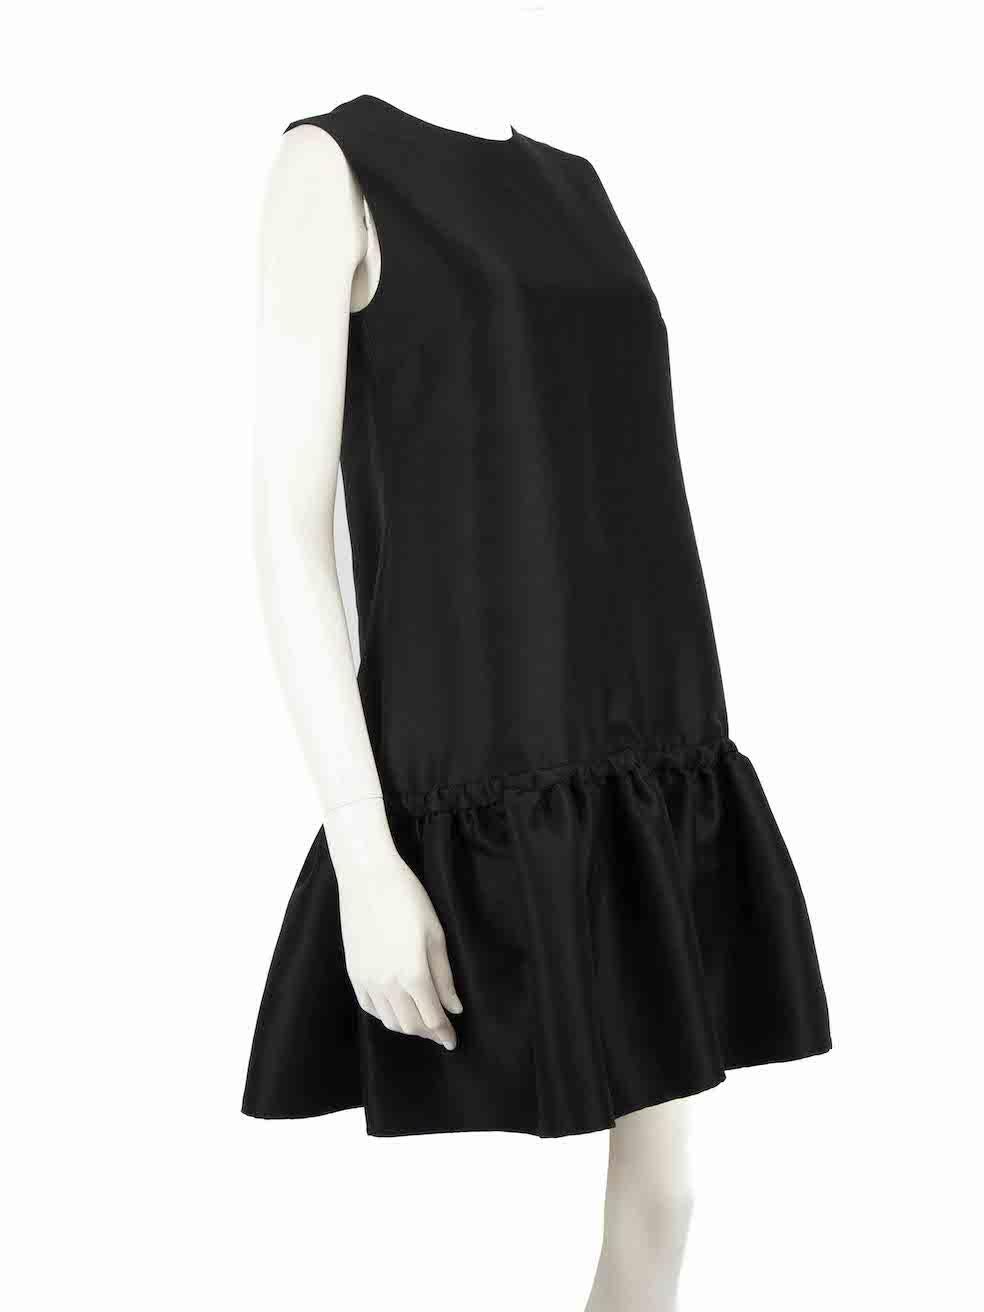 CONDITION is Very good. Minimal wear to dress is evident. Minimal wear to the garment lining which shows light discolouration under the arms on this used sample Victoria Victoria Beckham designer resale item.
 
 
 
 Details
 
 
 Black
 
 Synthetic
